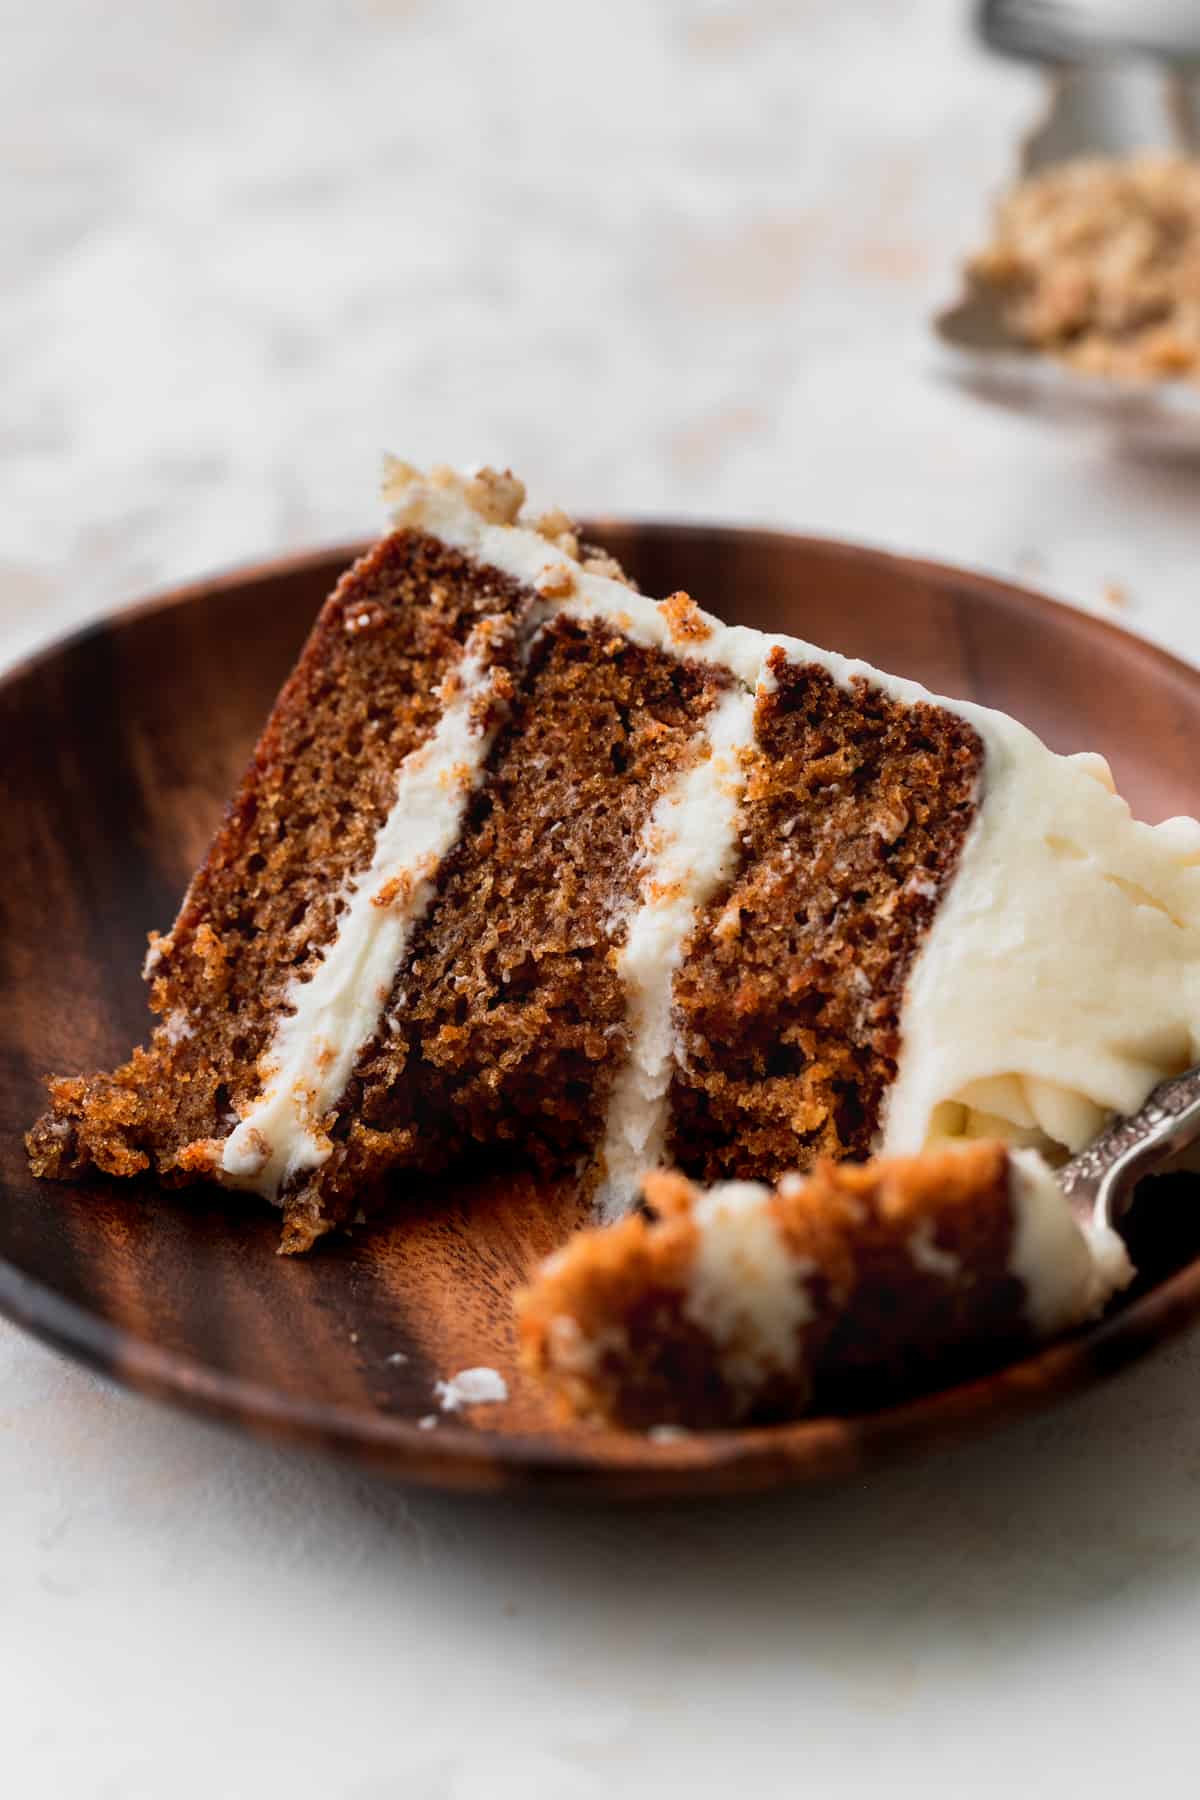 Slice of carrot cake on a plate with a bite missing.